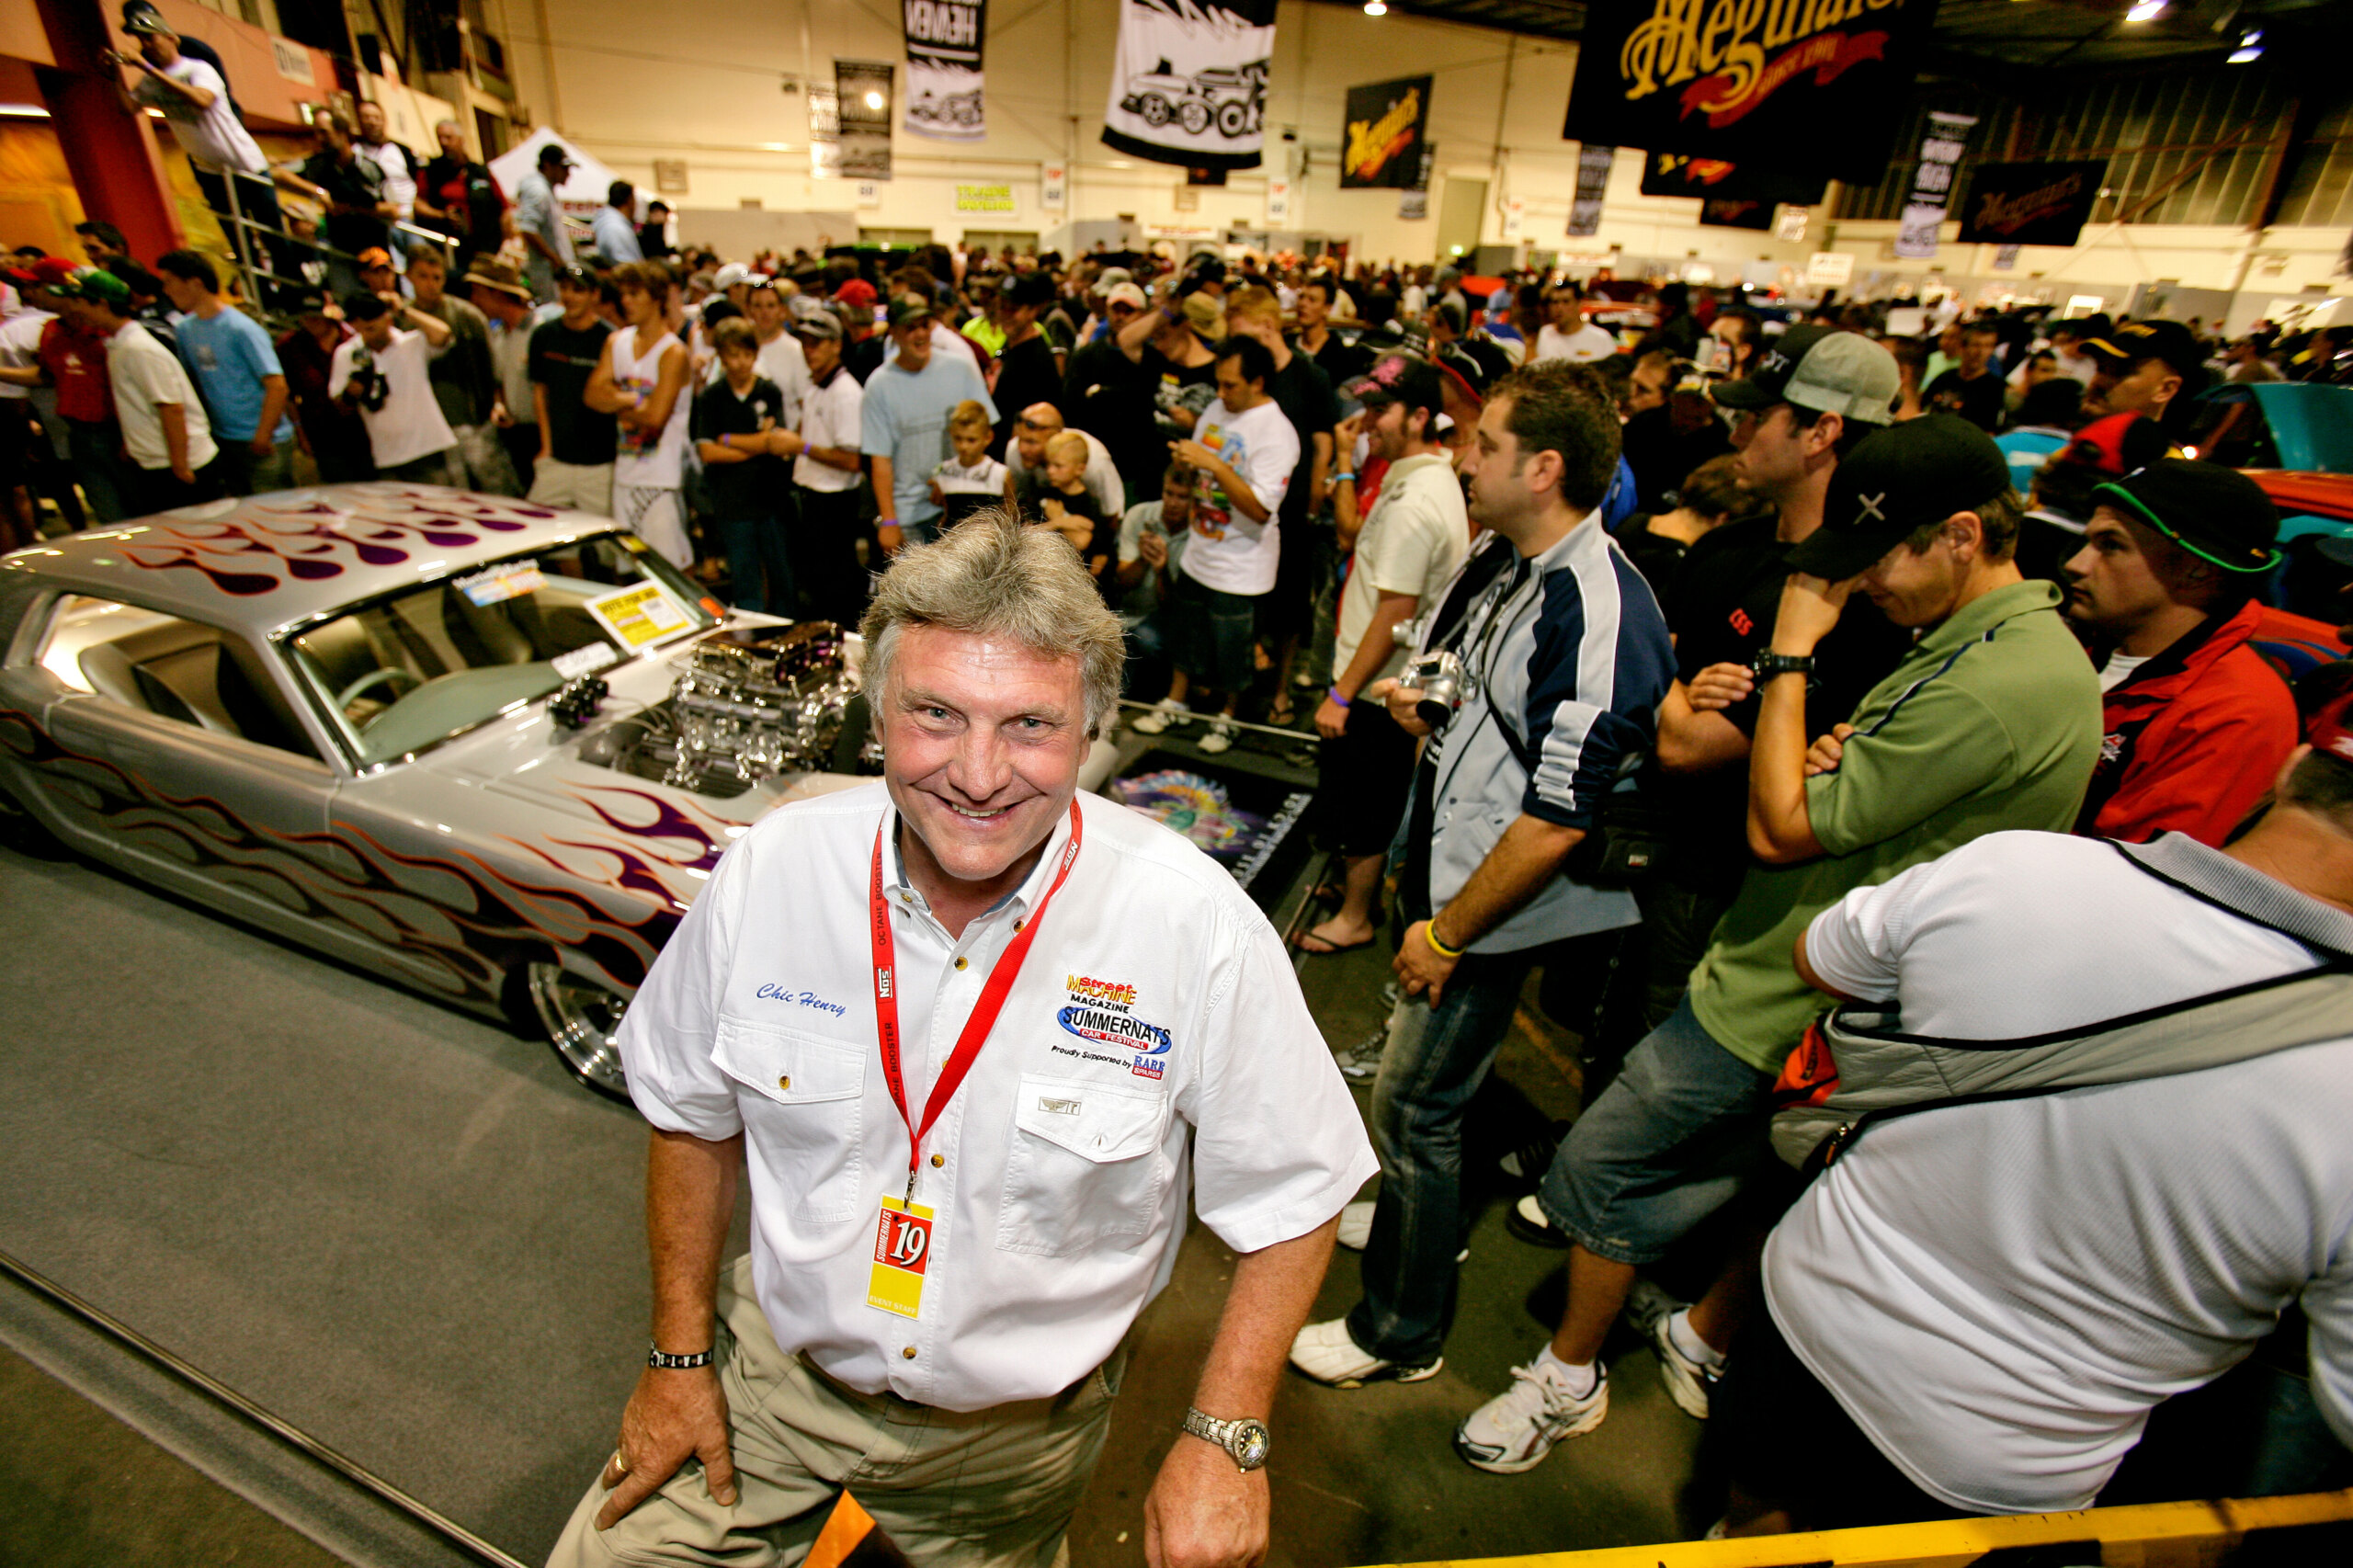 Summernats founder Chic Henry passes, aged 75